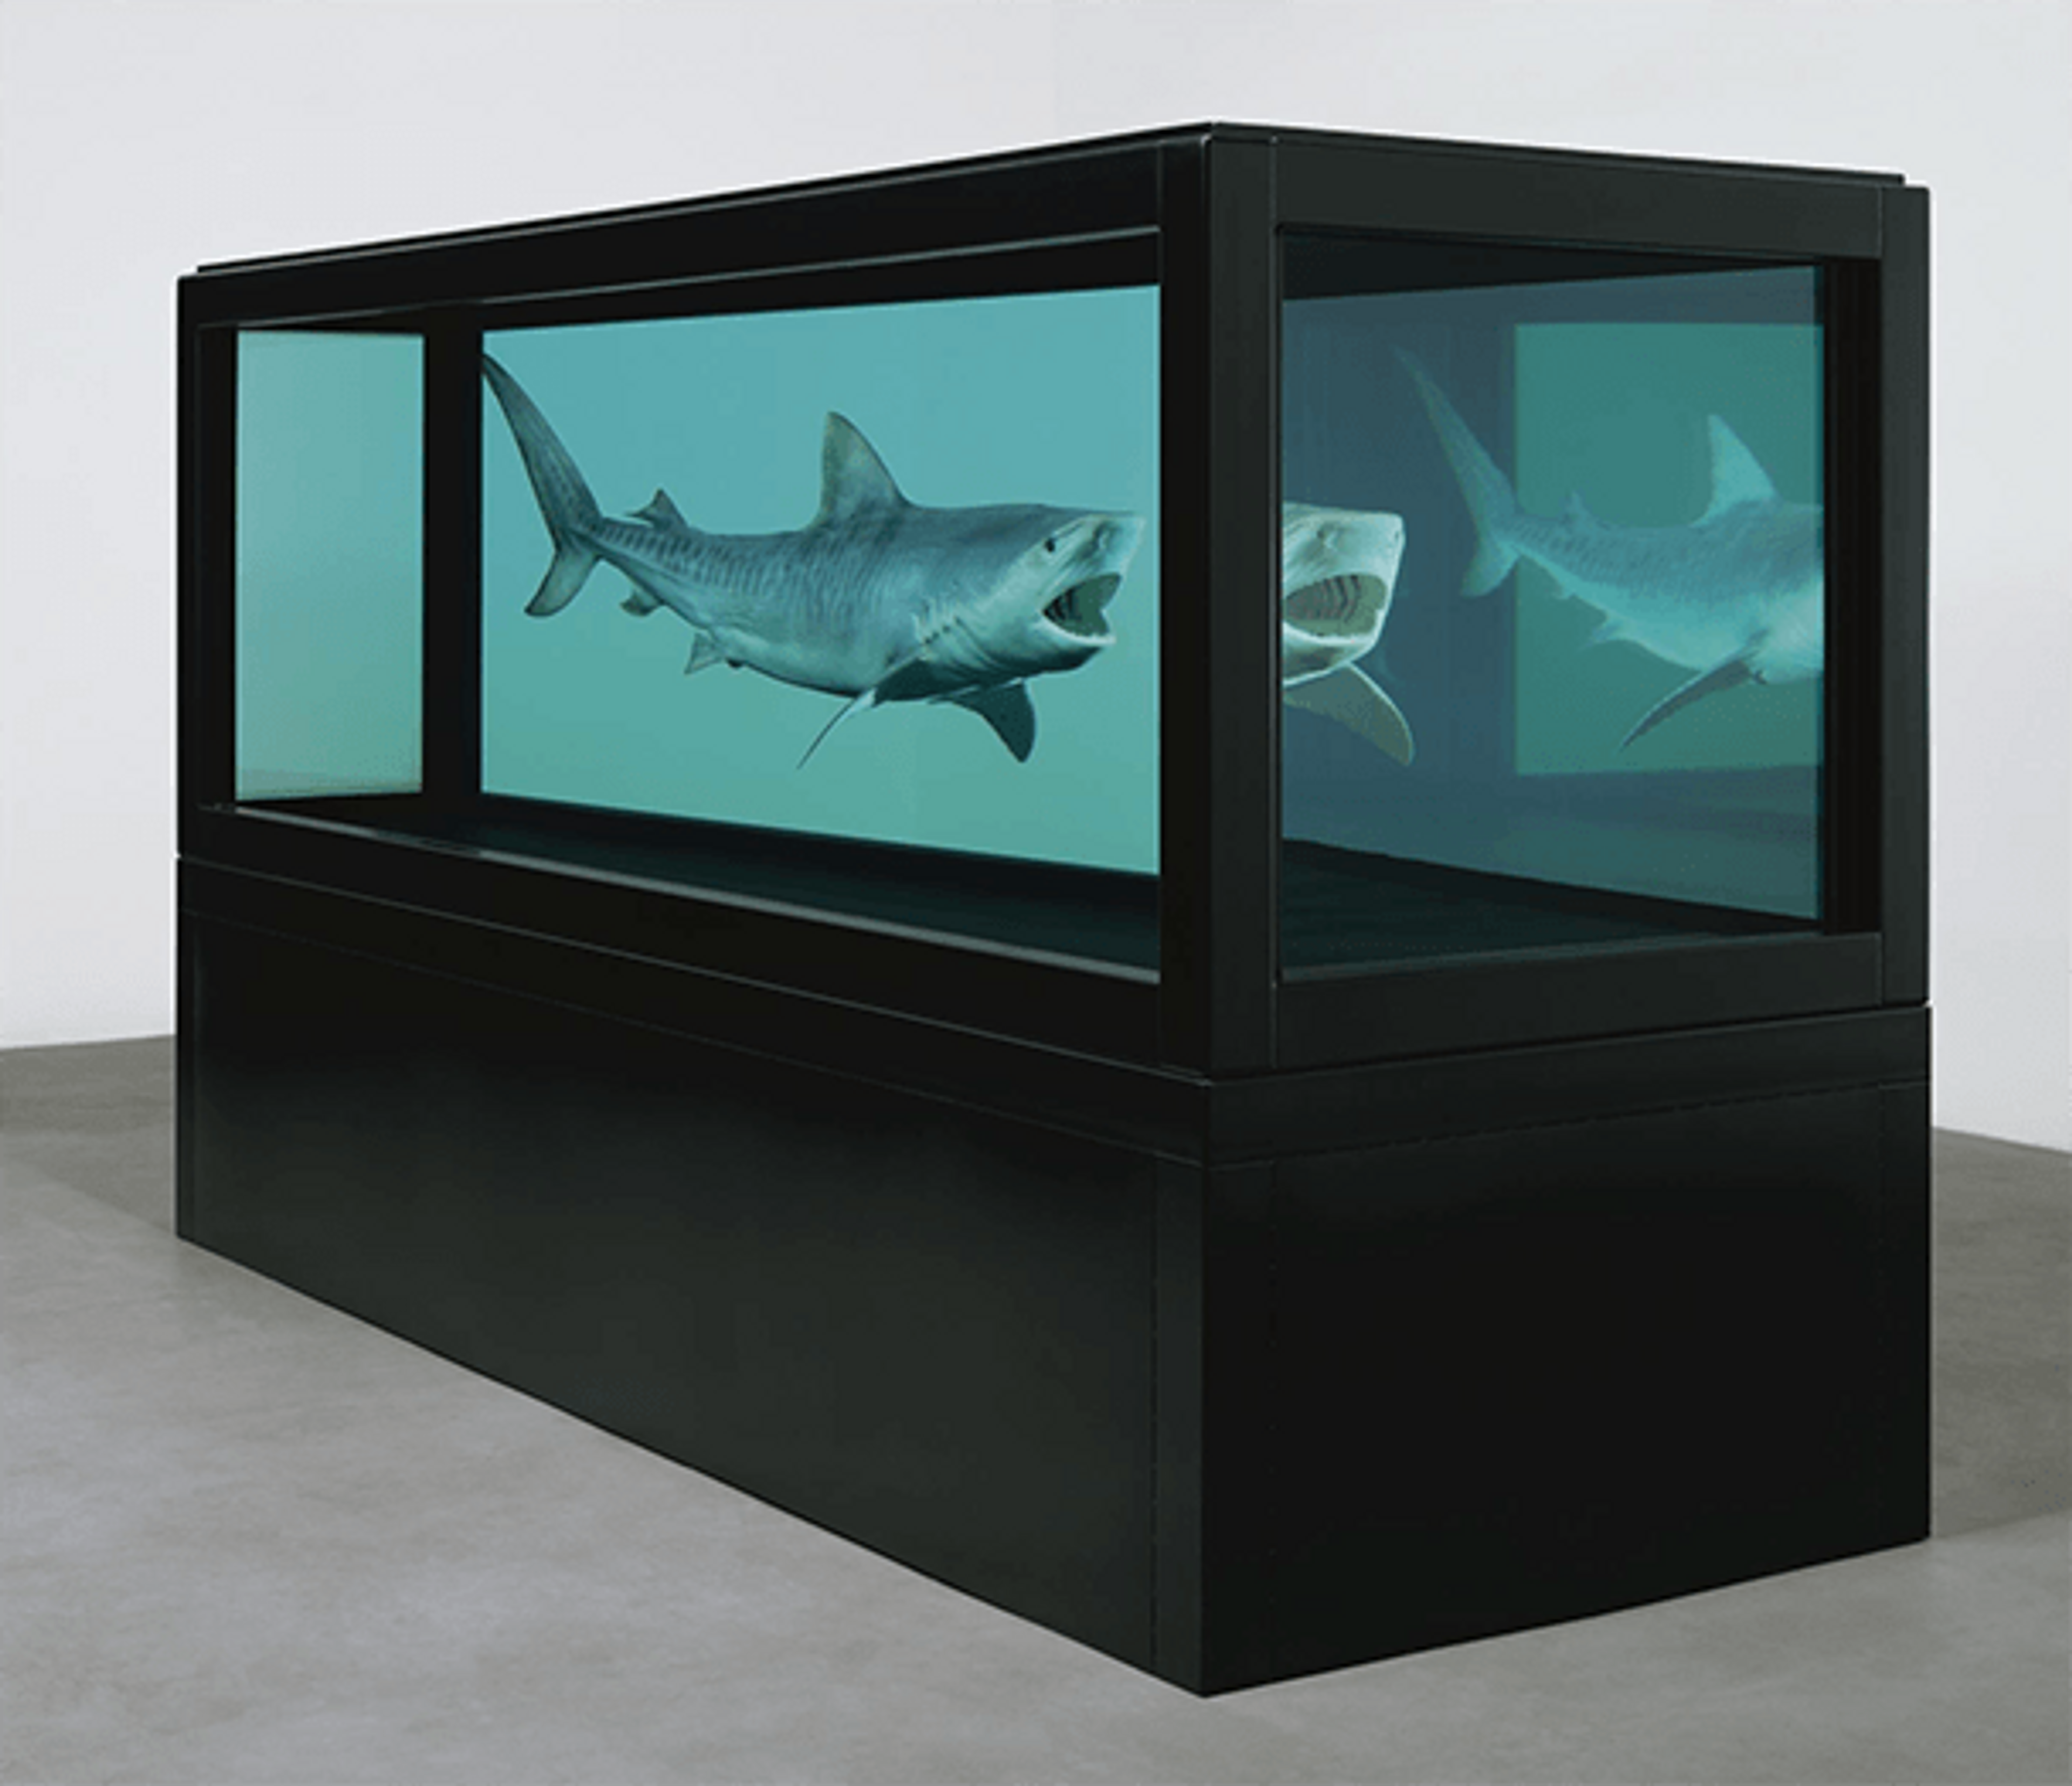 The Kingdom by Damien Hirst